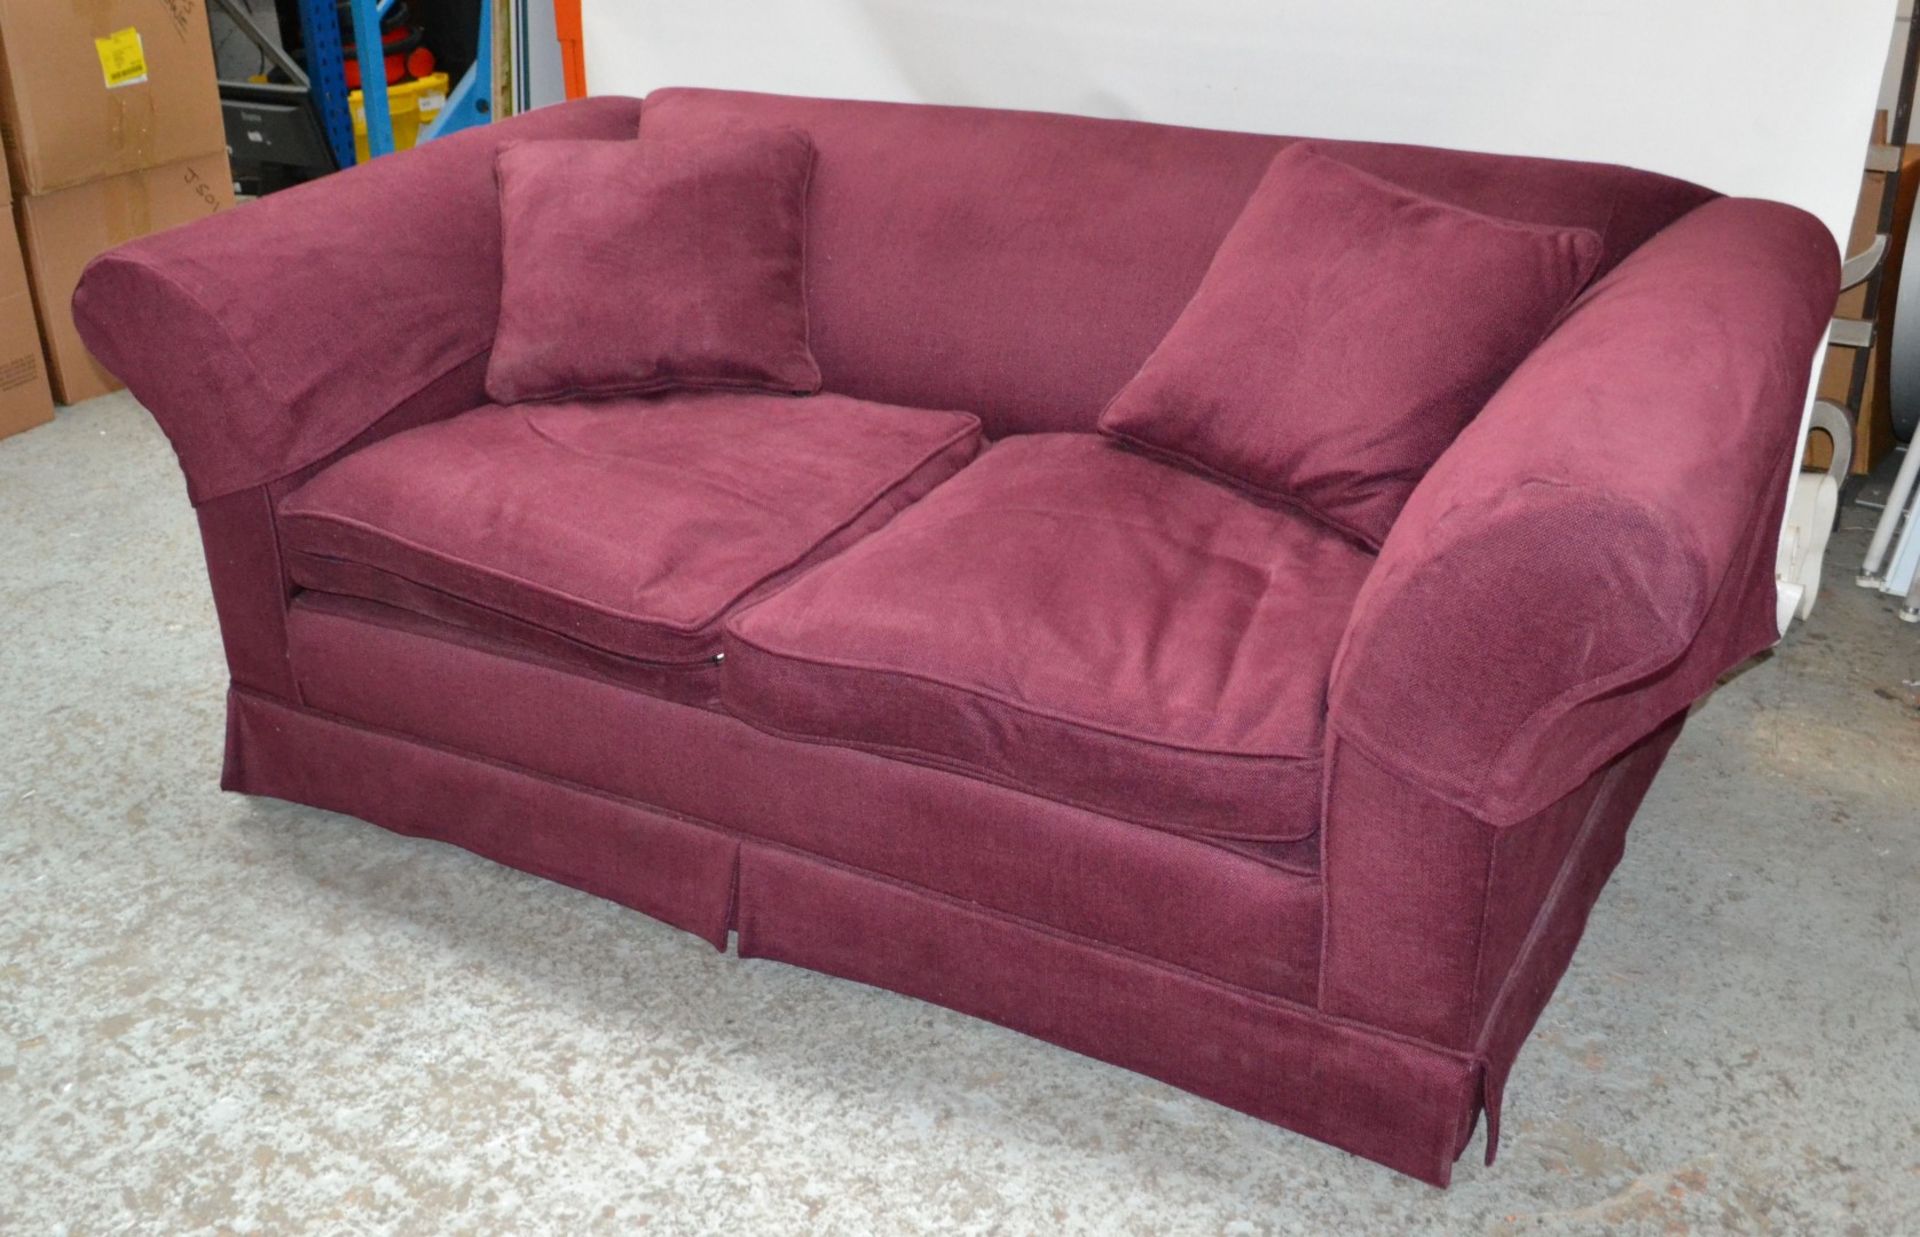 1 x Large Purple Sofa With Arm Covers - CL314 - Location: Altrincham WA14 - *NO VAT On Hammer*<B